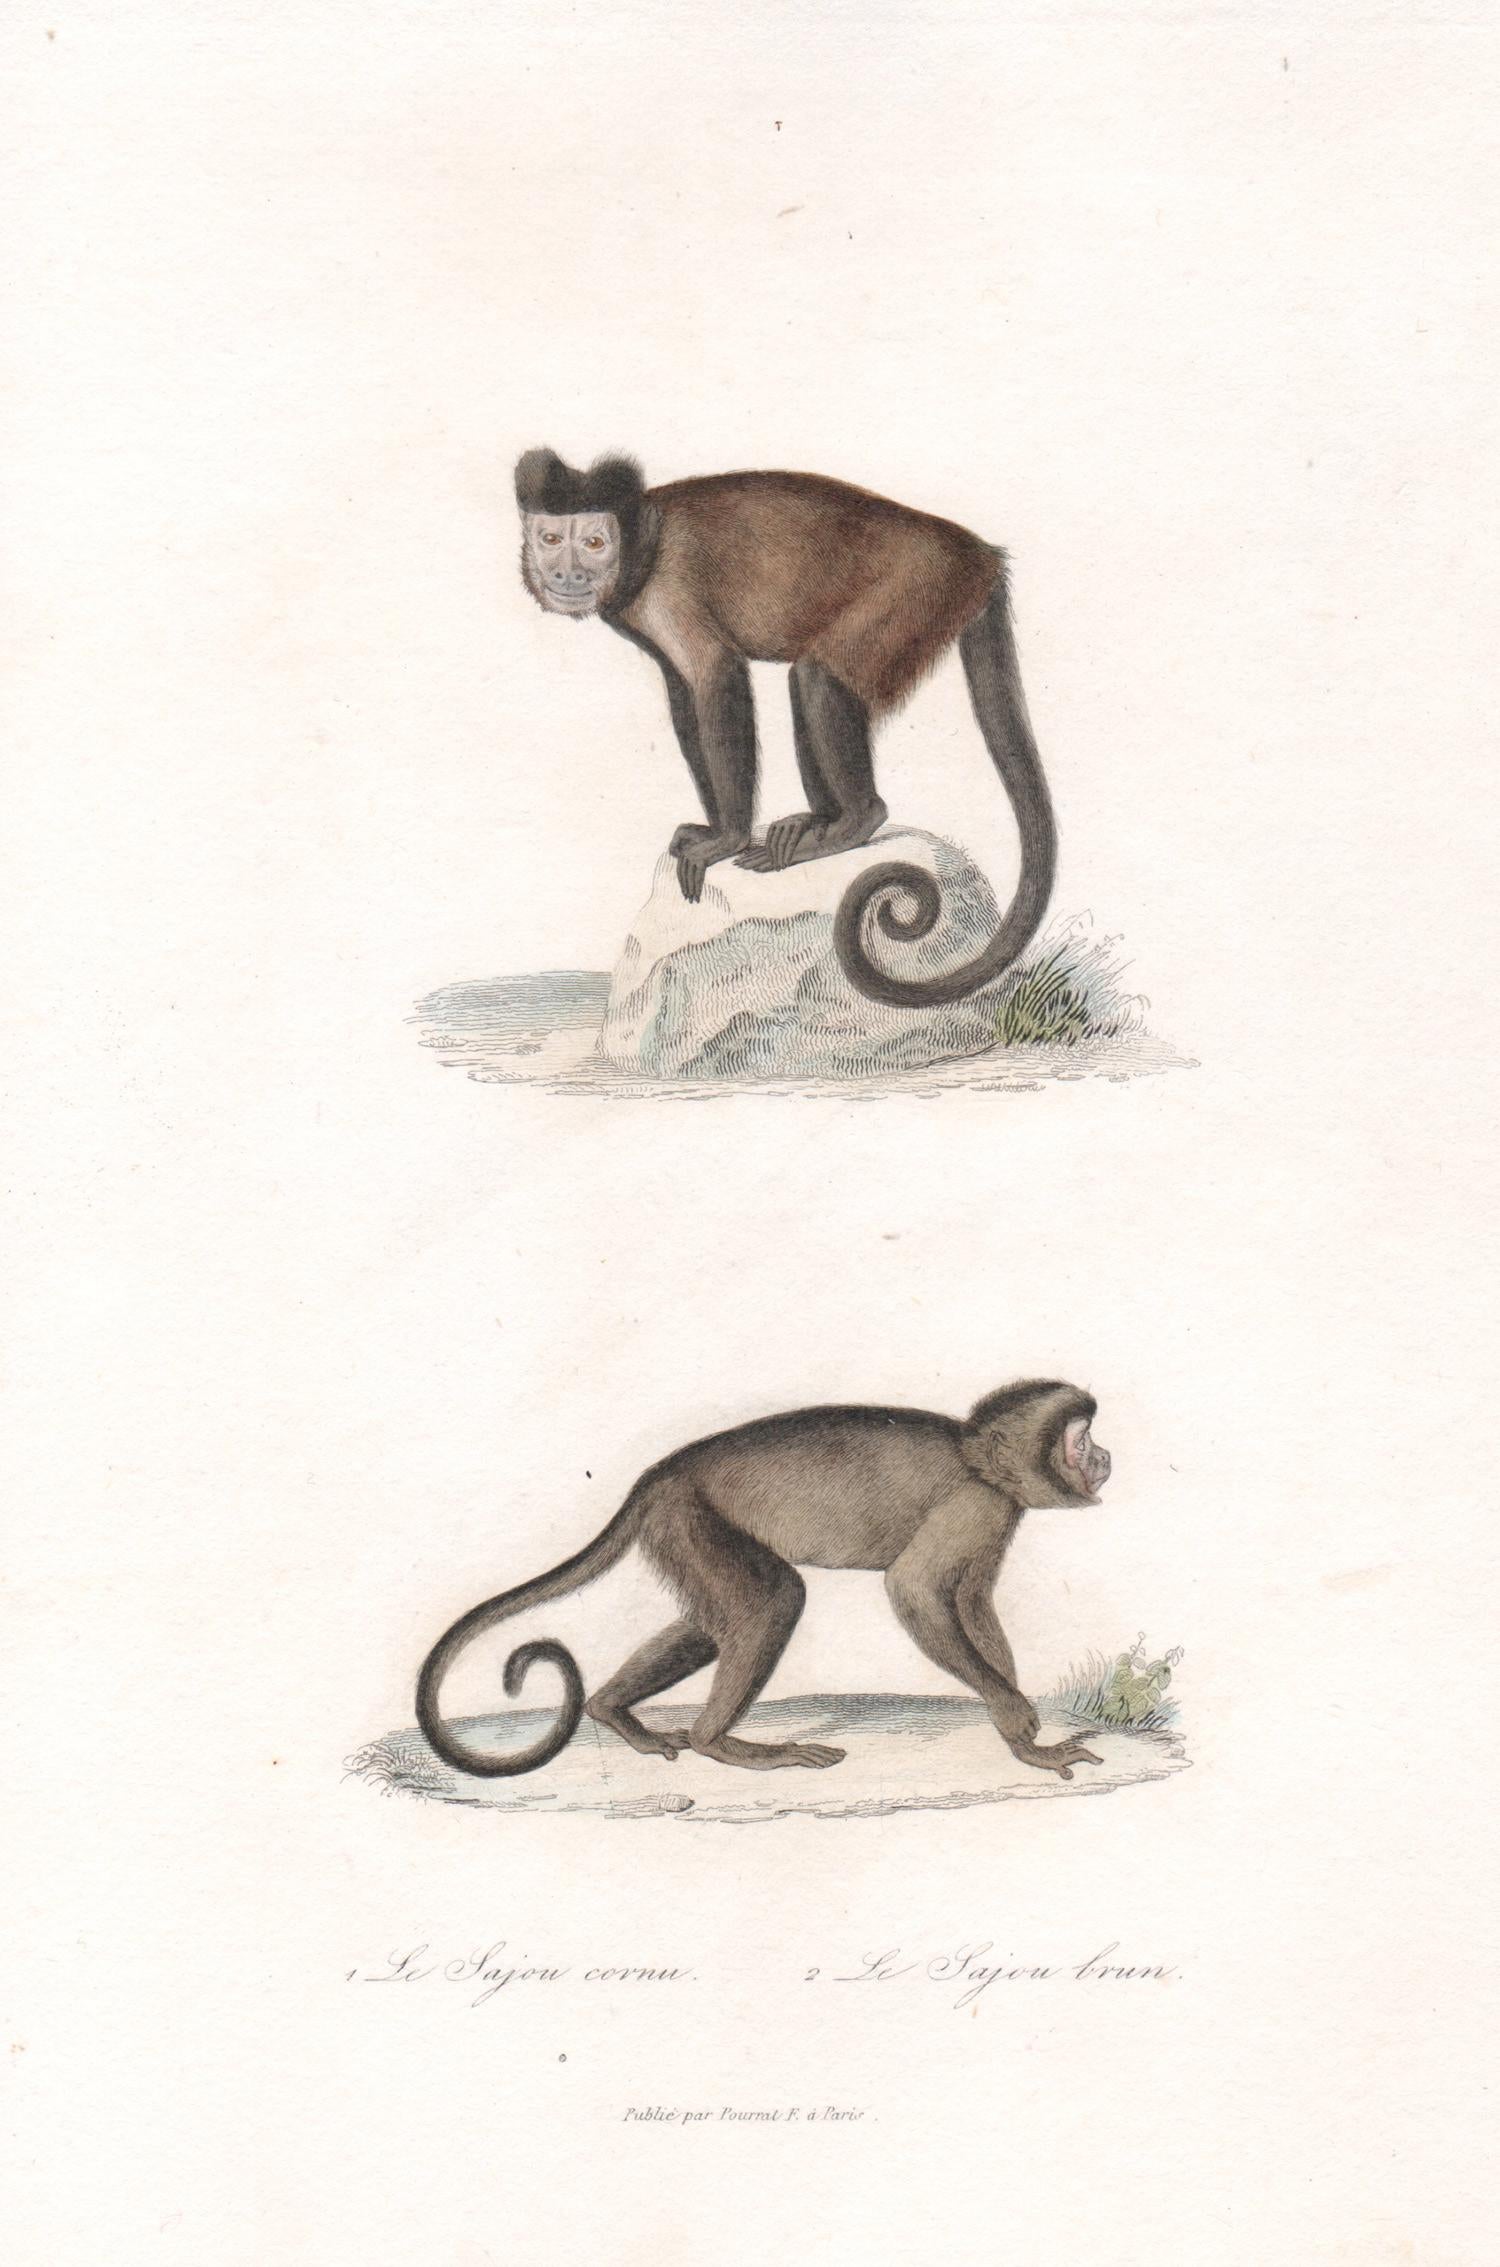 Unknown Animal Print - Capuchins, mid 19th French century animal engraving